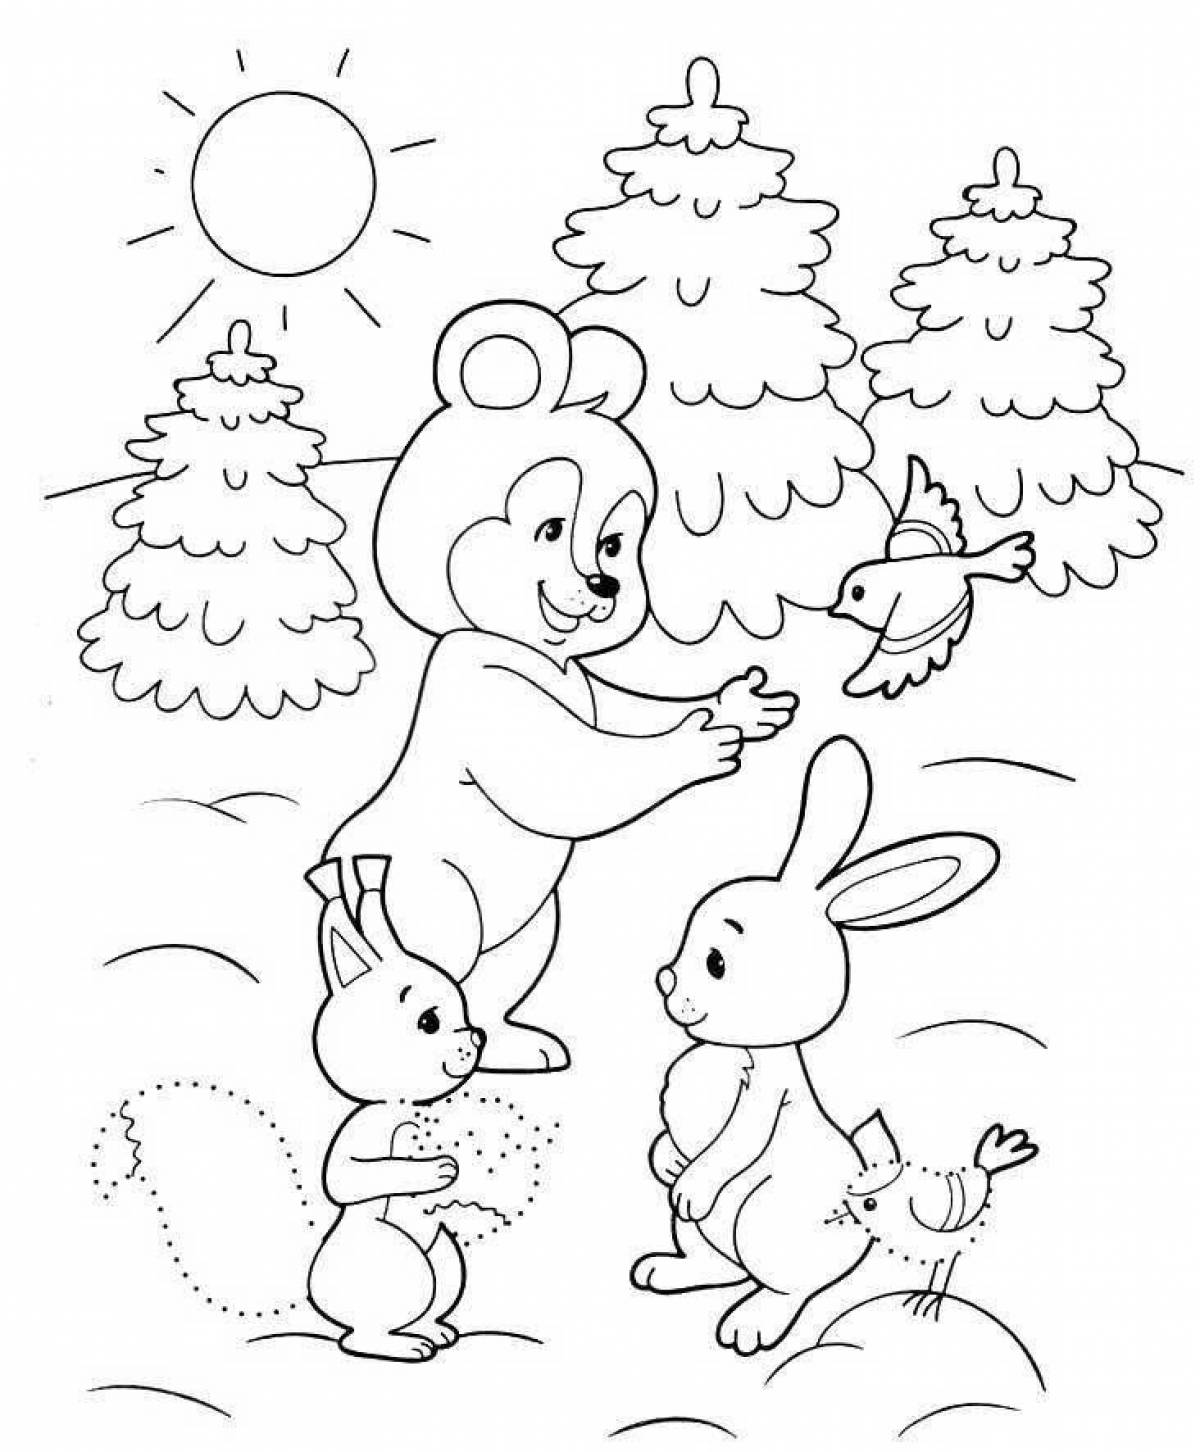 Brilliant winter in the forest coloring book